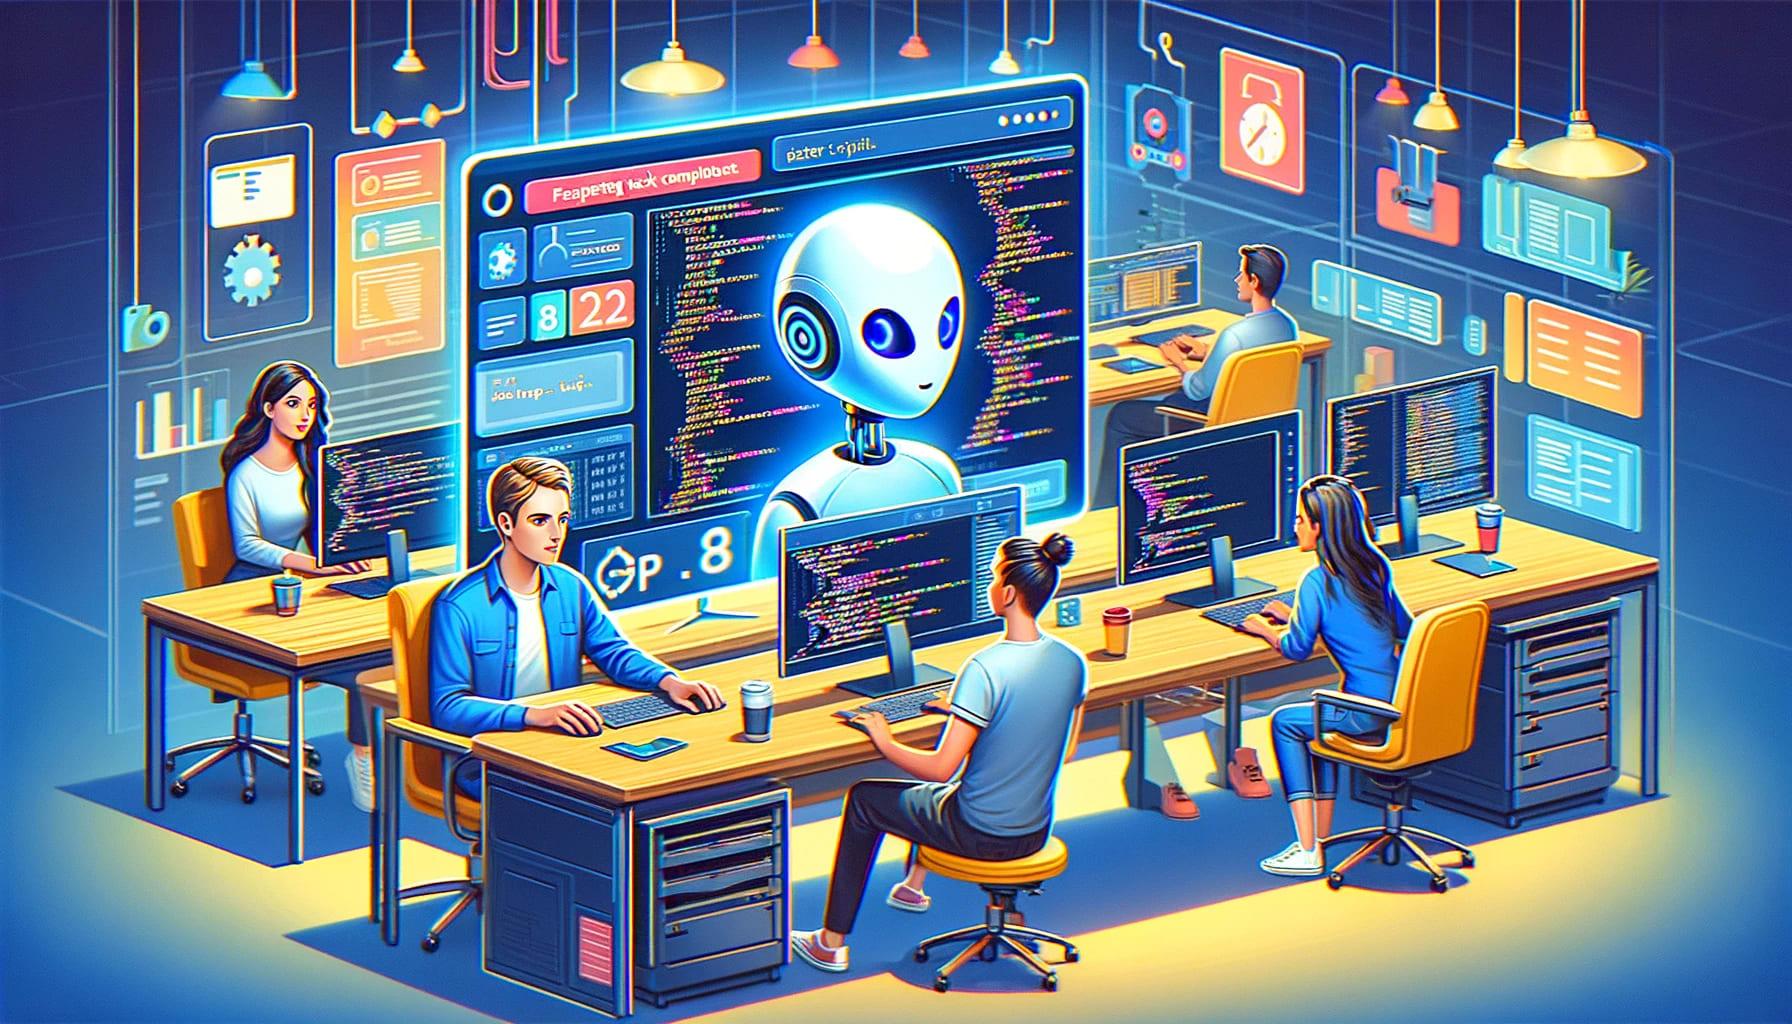 Vibrant illustration of a futuristic tech office environment featuring an advanced AI assistant interacting with a diverse team of developers. The office is equipped with high-tech computers and multiple displays showcasing coding tasks, software development progress, and data analytics. Ideal for articles on artificial intelligence in the workplace, collaborative technology teams, and the future of enterprise application development.